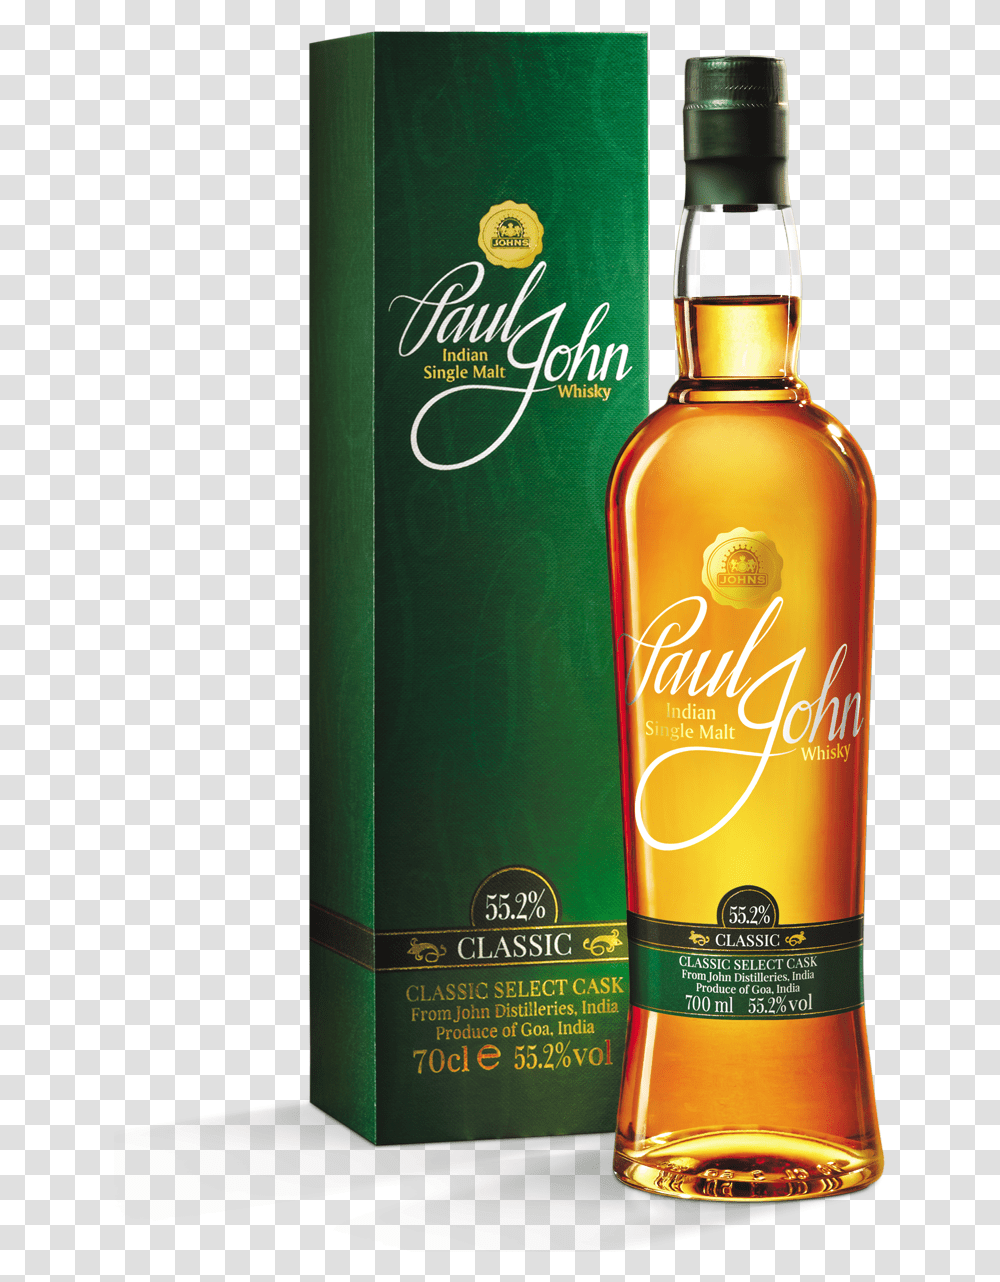 Classic Select Cask Single Malt Whisky From Paul John Paul John Classic Select Cask, Liquor, Alcohol, Beverage, Drink Transparent Png